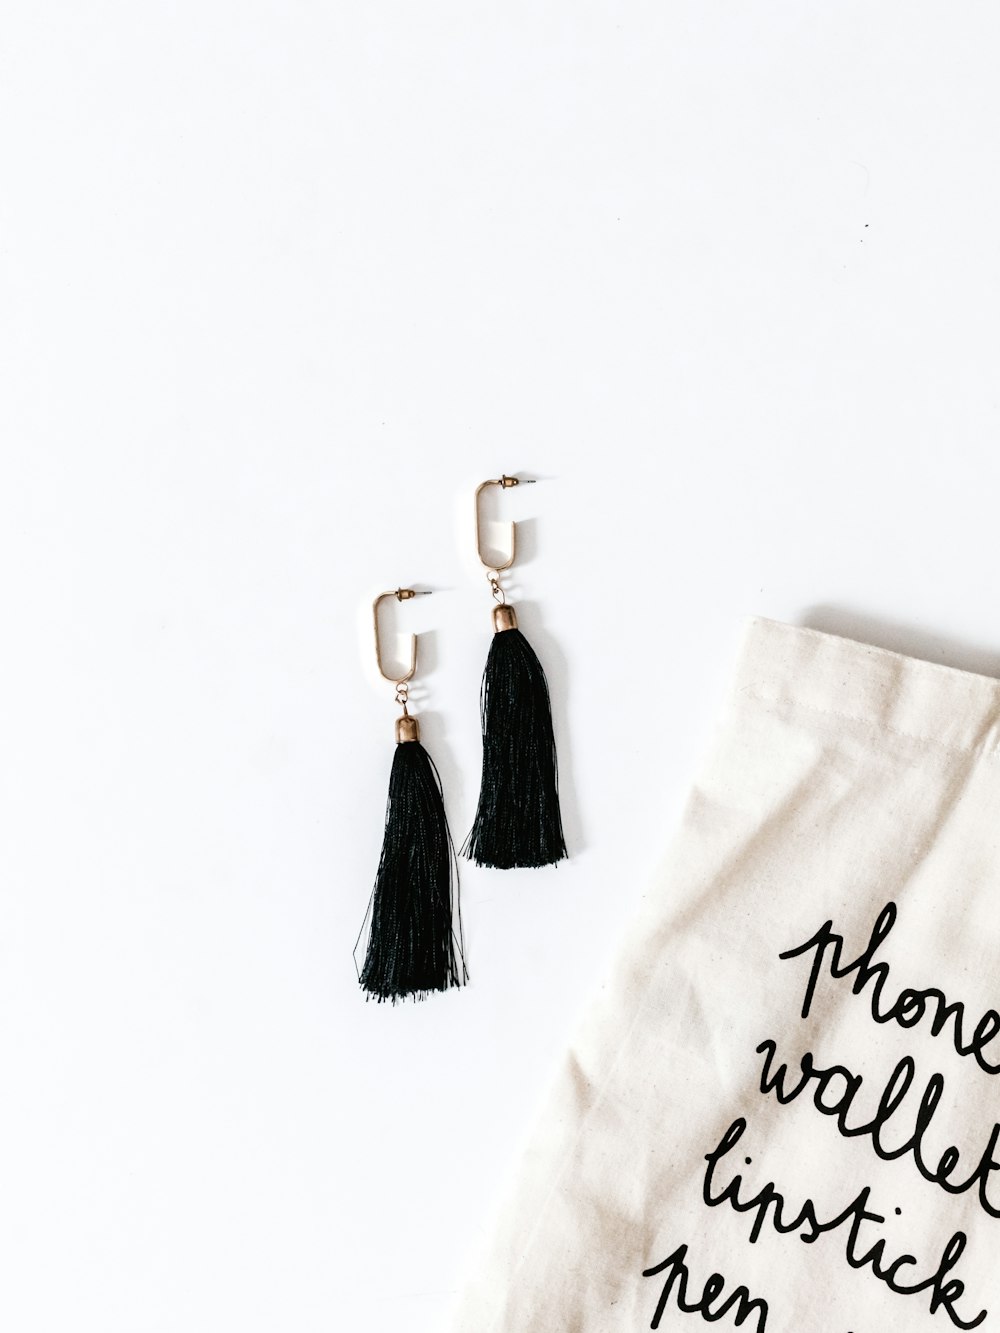 silver-colored earrings and black tassels